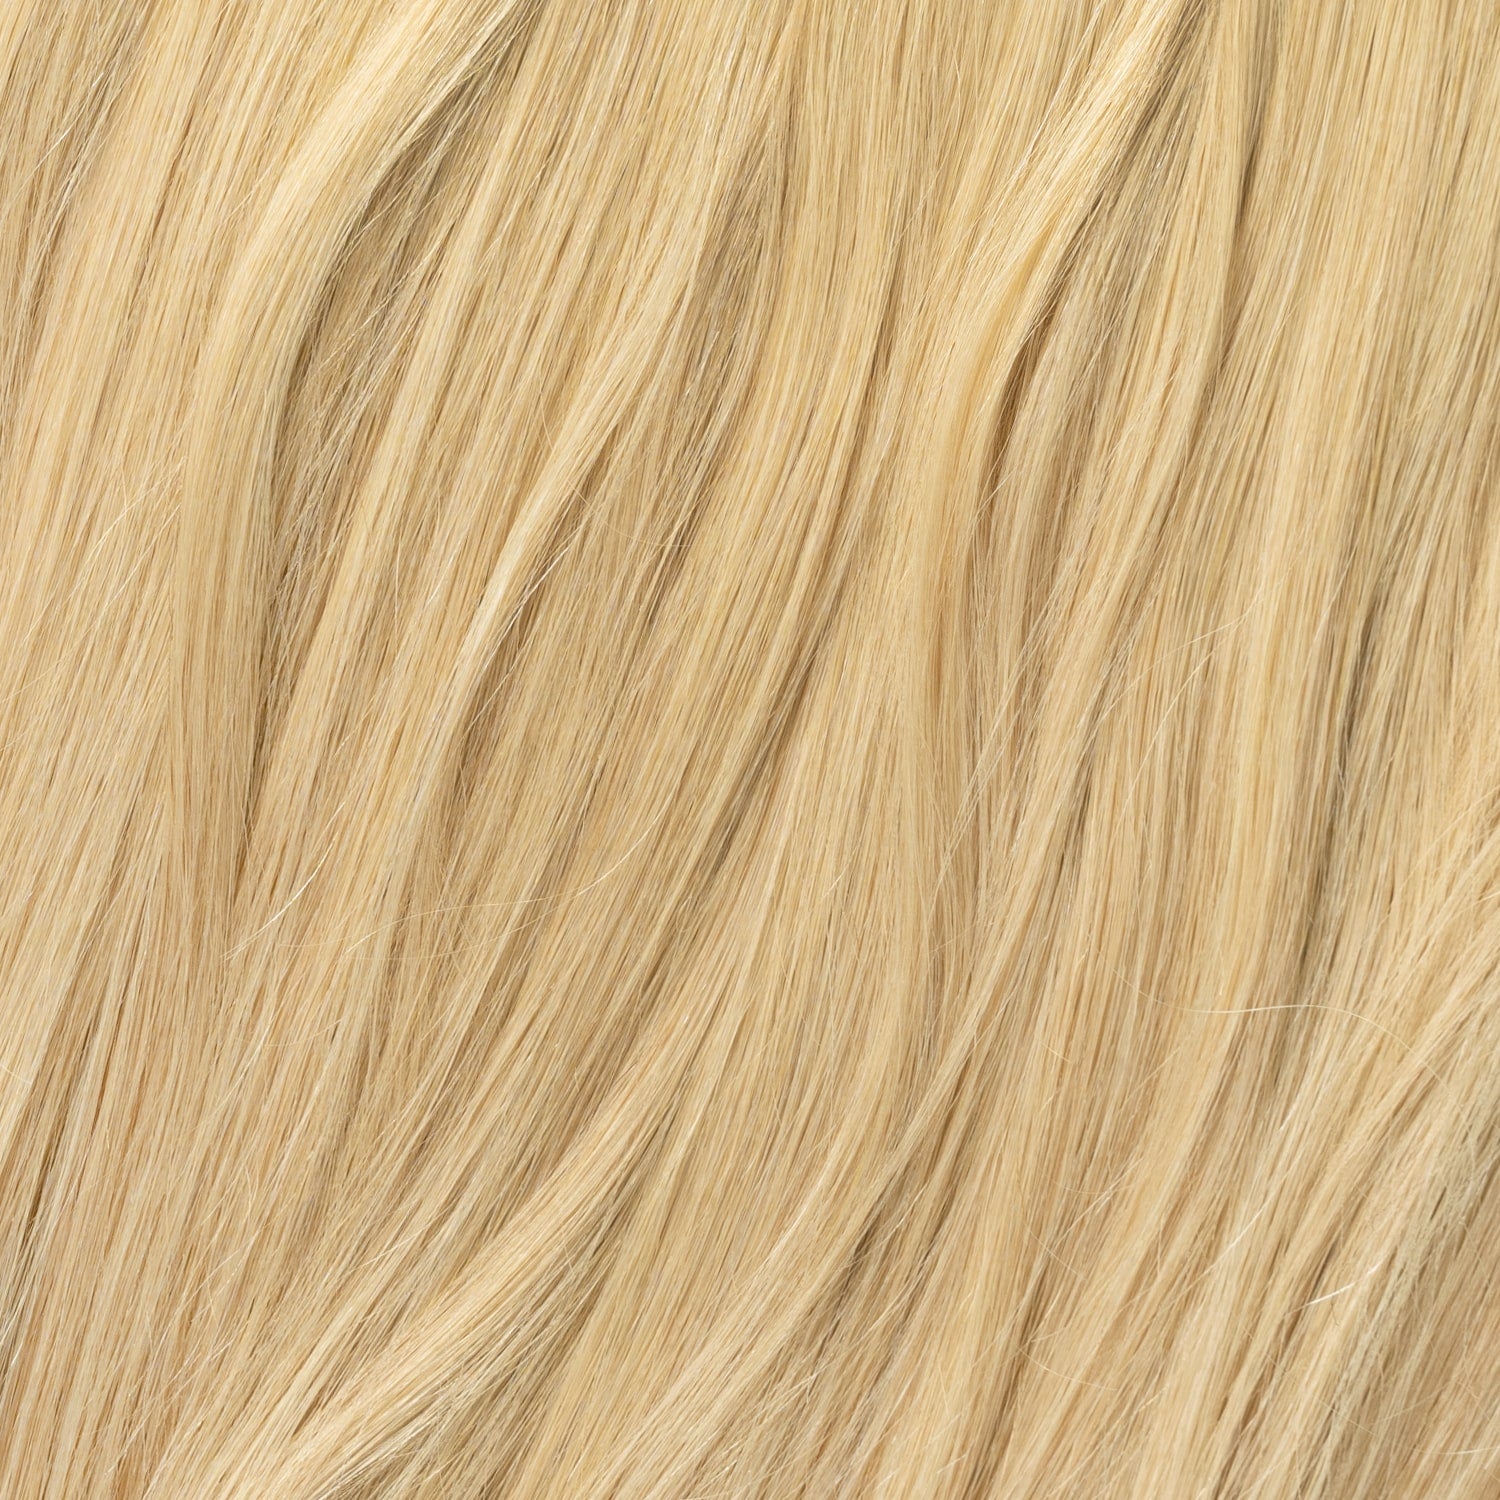 Clip on - Honey Blonde 15A